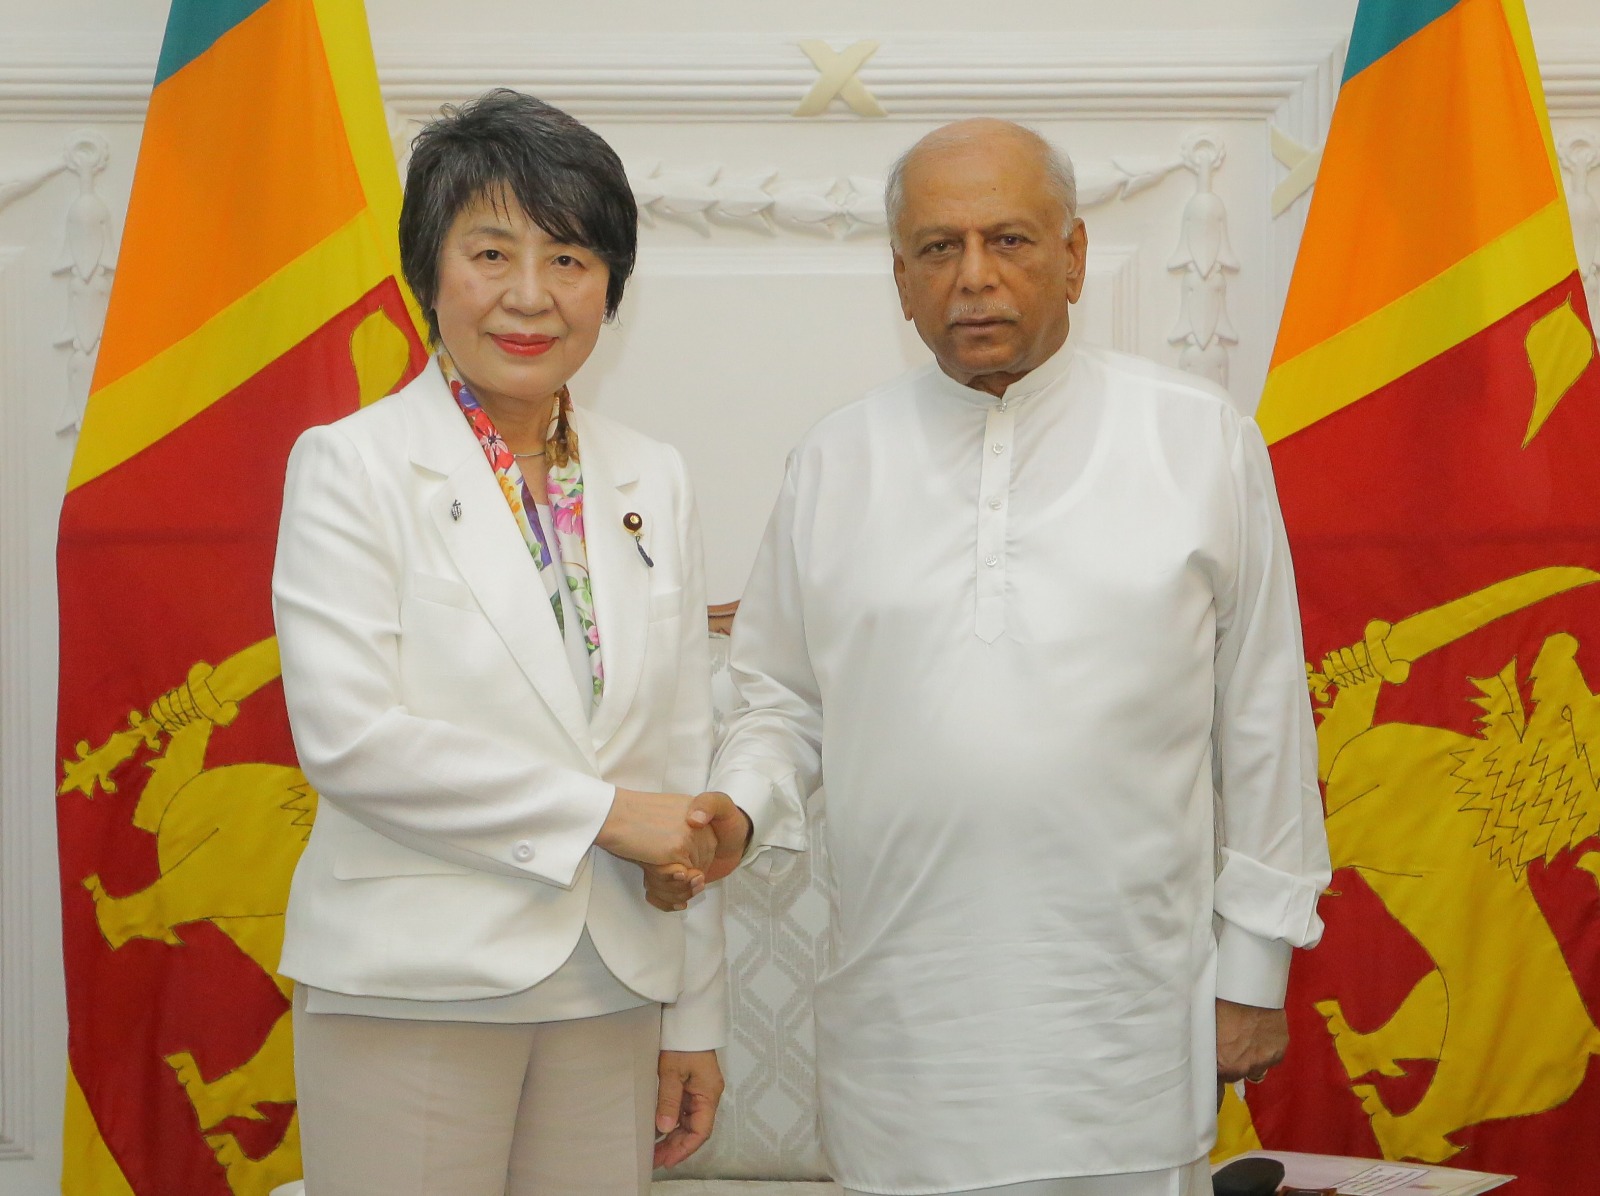 Japan expects Sri Lanka to expedite debt restructuring arrangements with China & private lenders